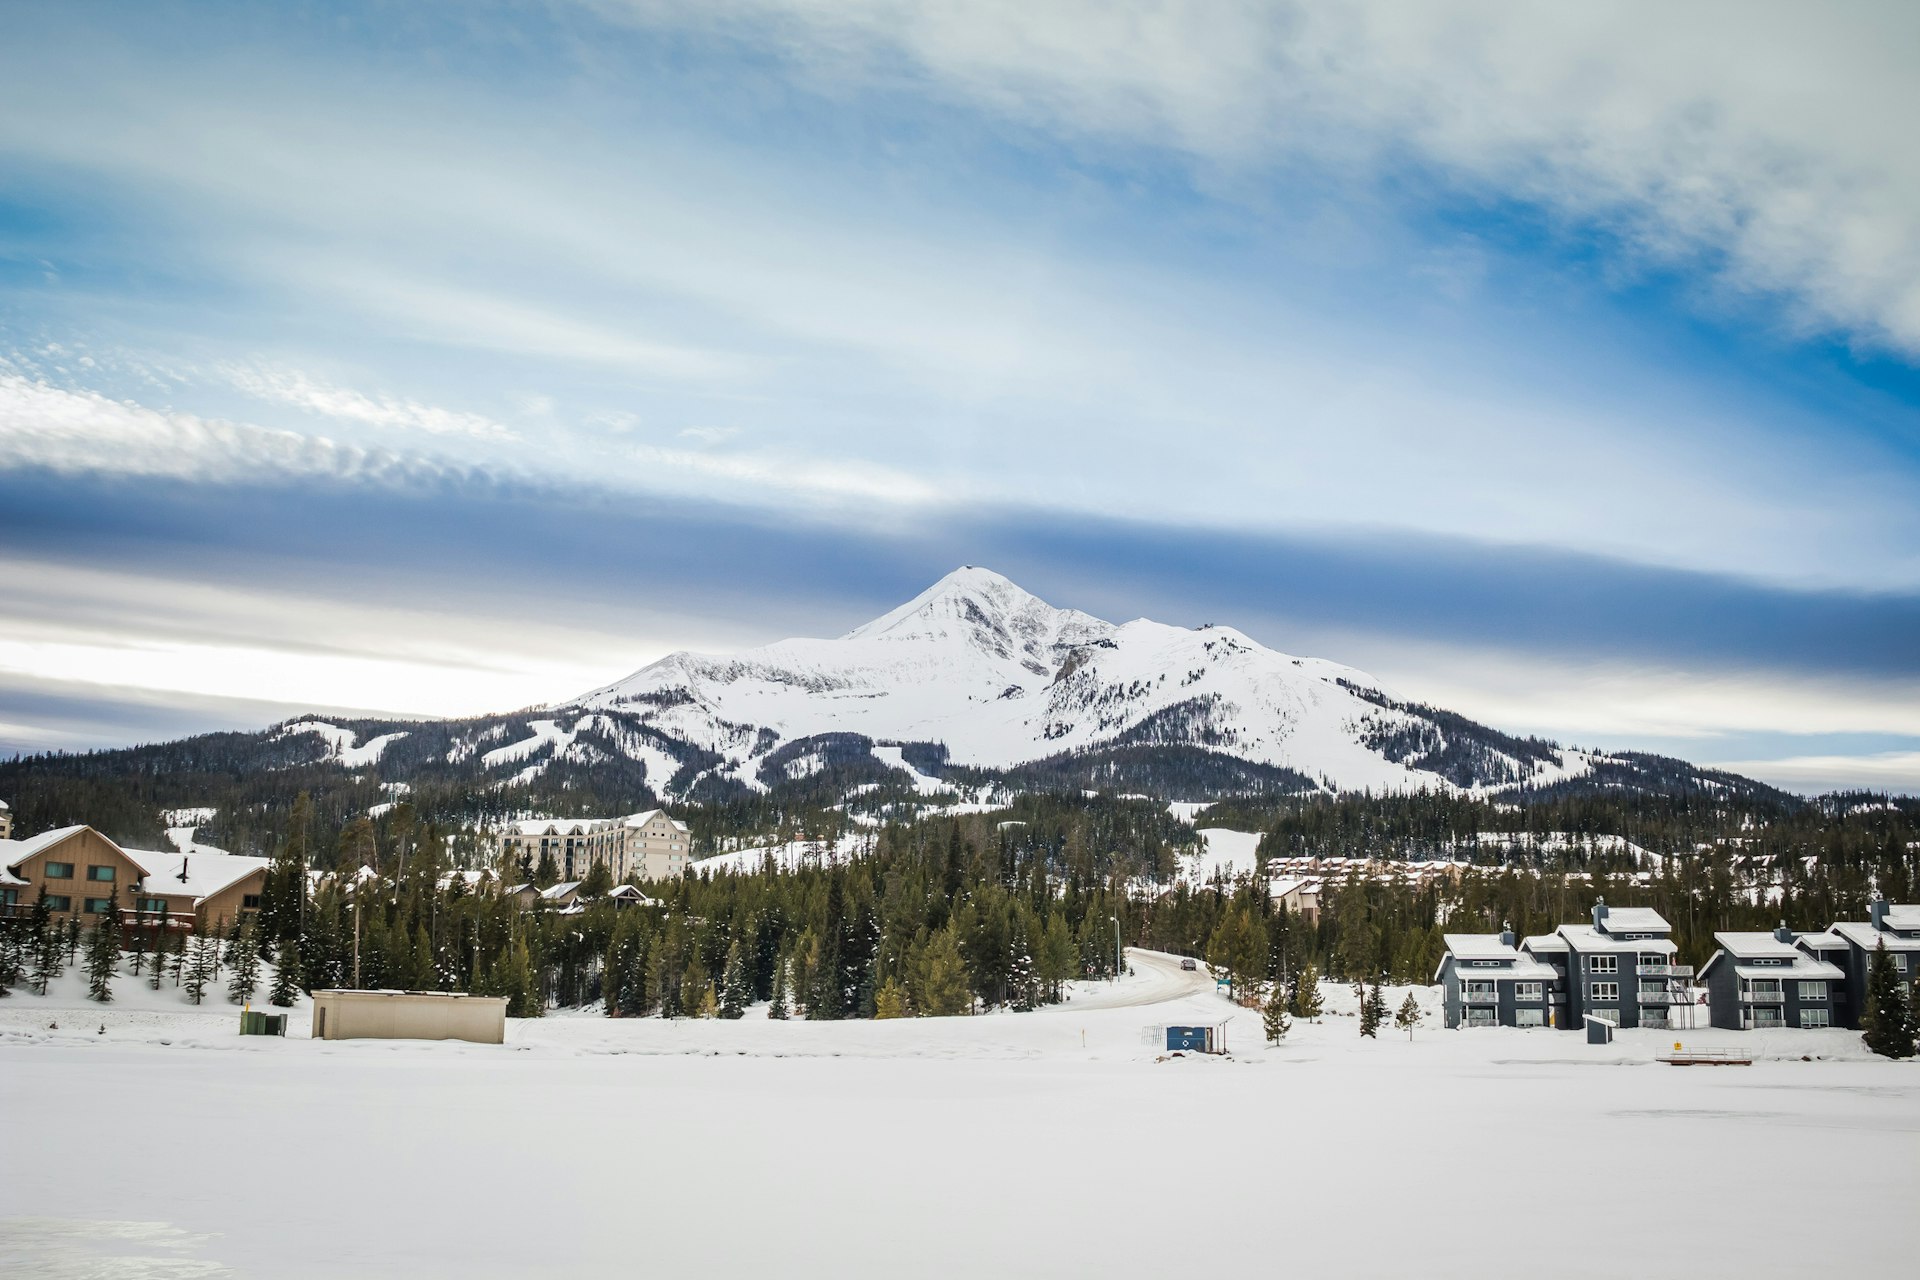 Big Sky Resort at the end of a beautiful November day